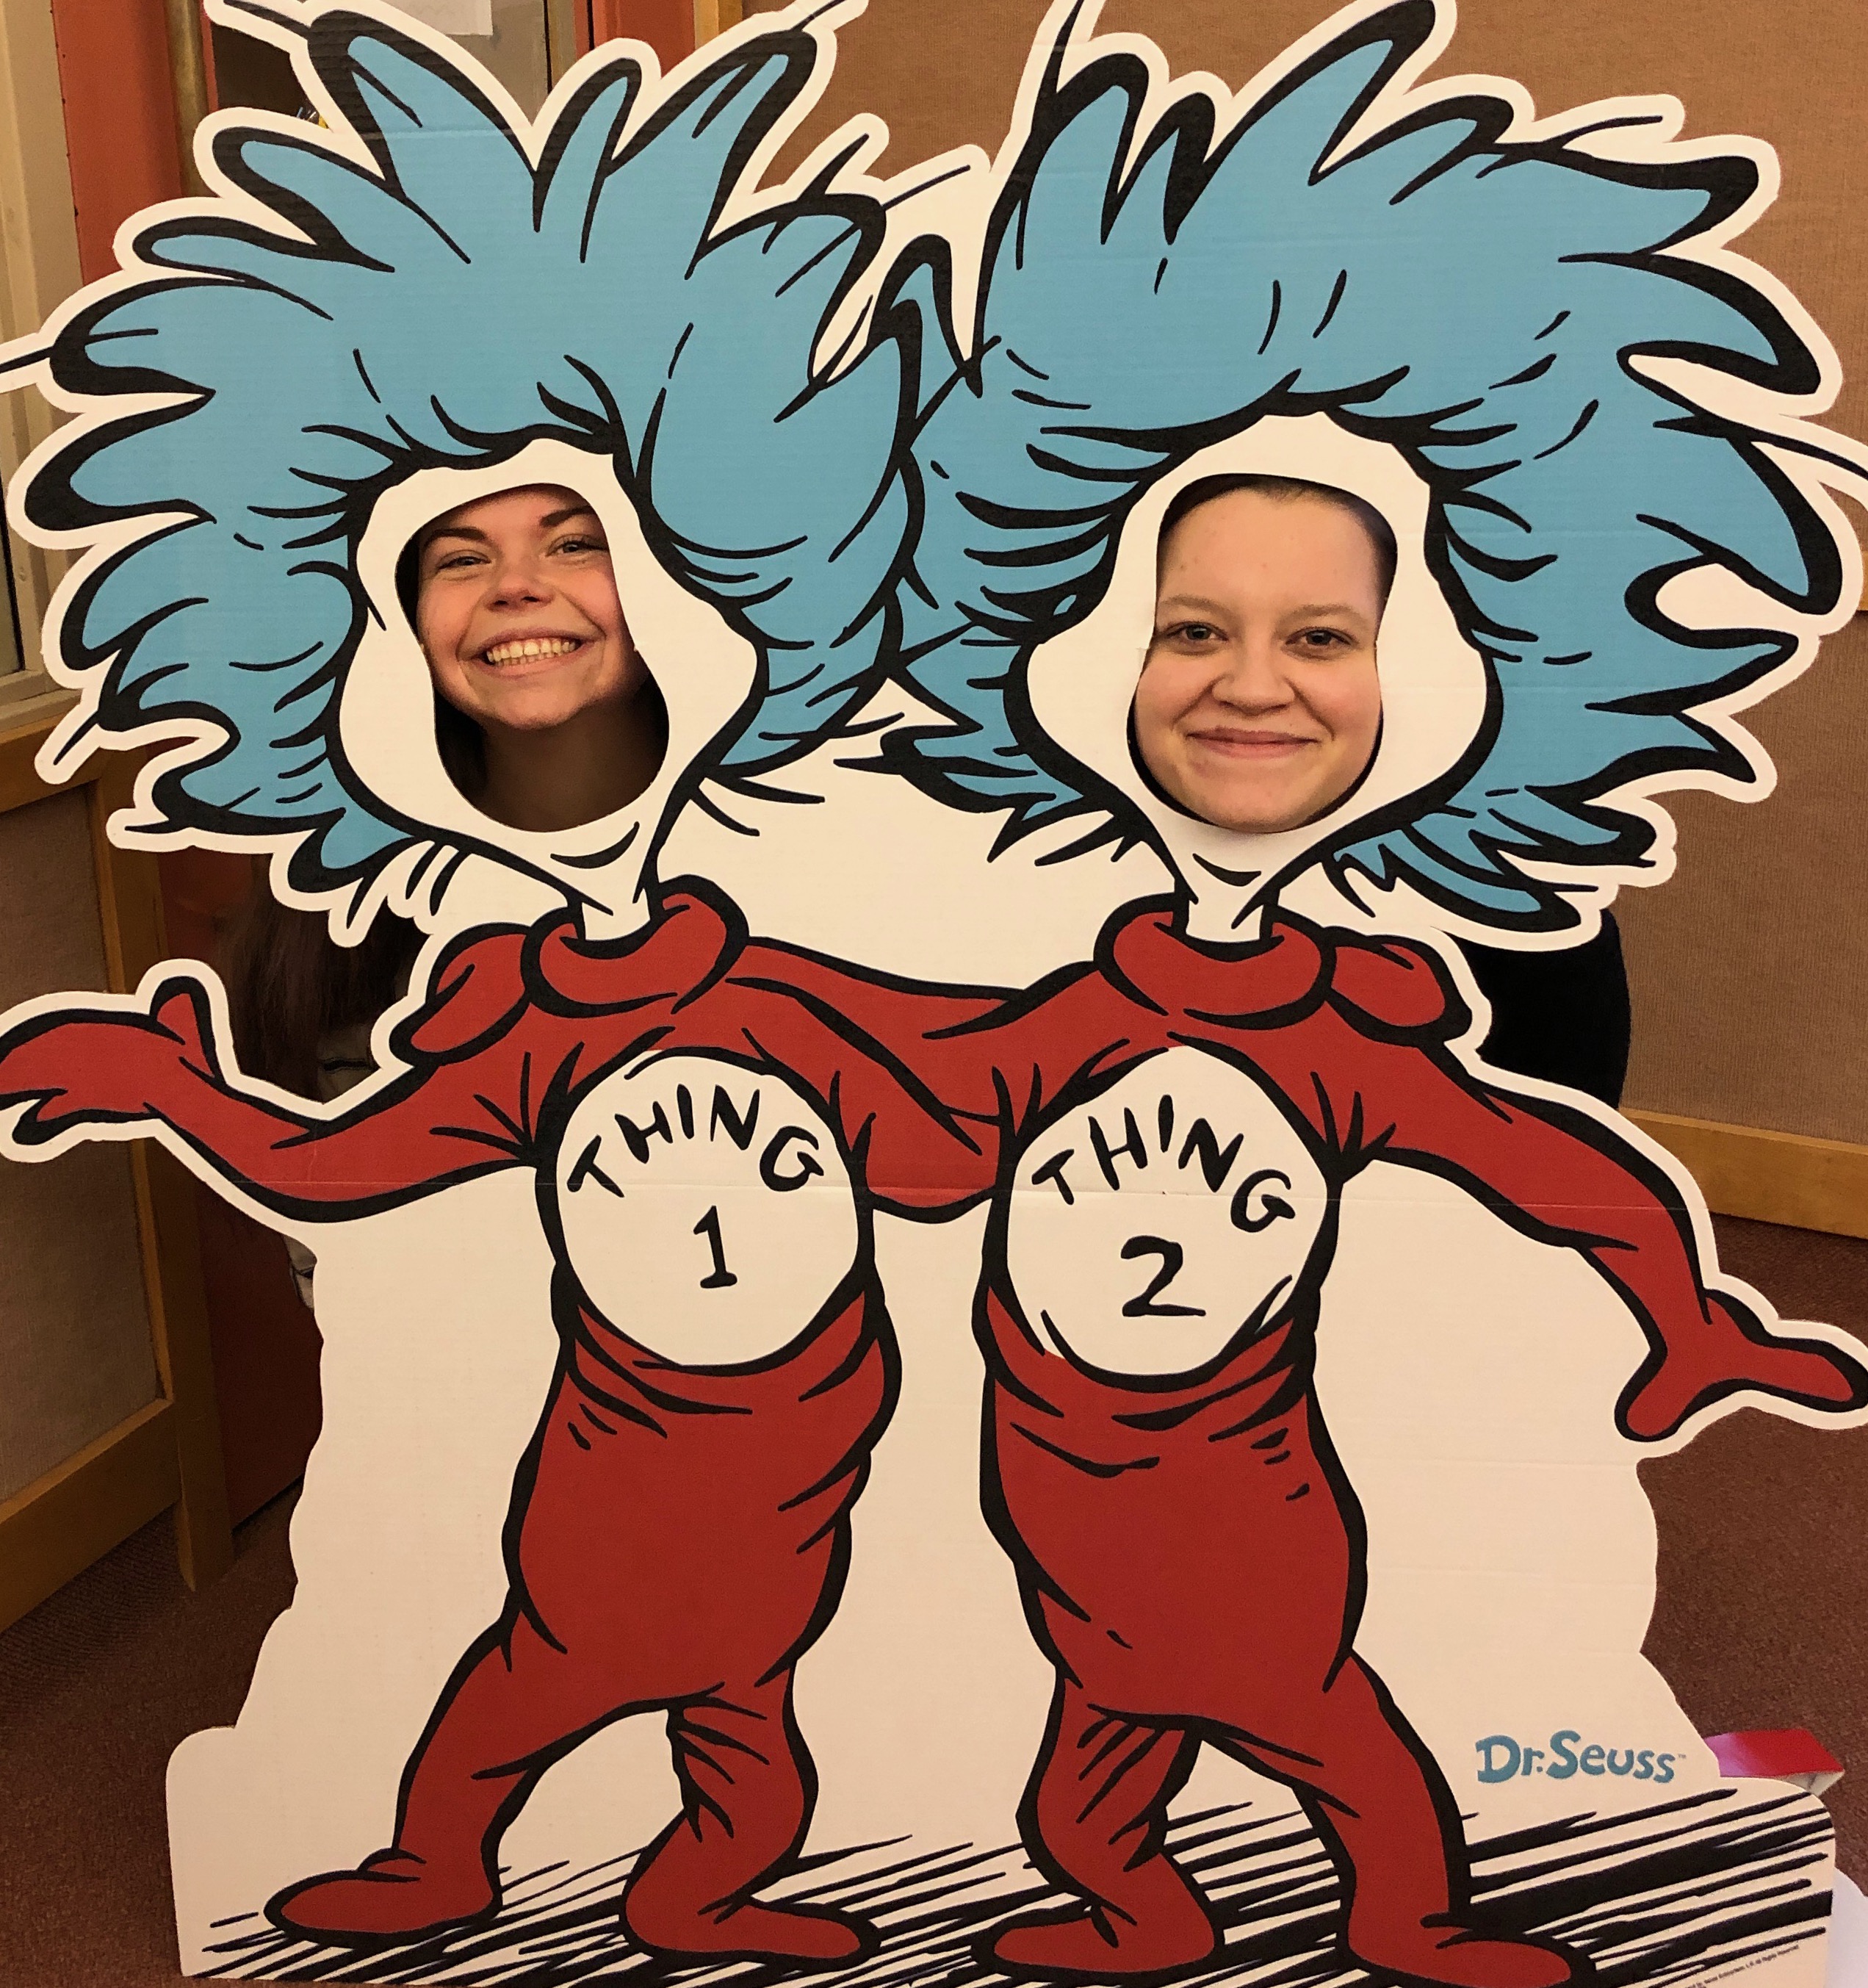 Two girls stick their heads through face cut-outs, their bodies are thing 1 and thing 2